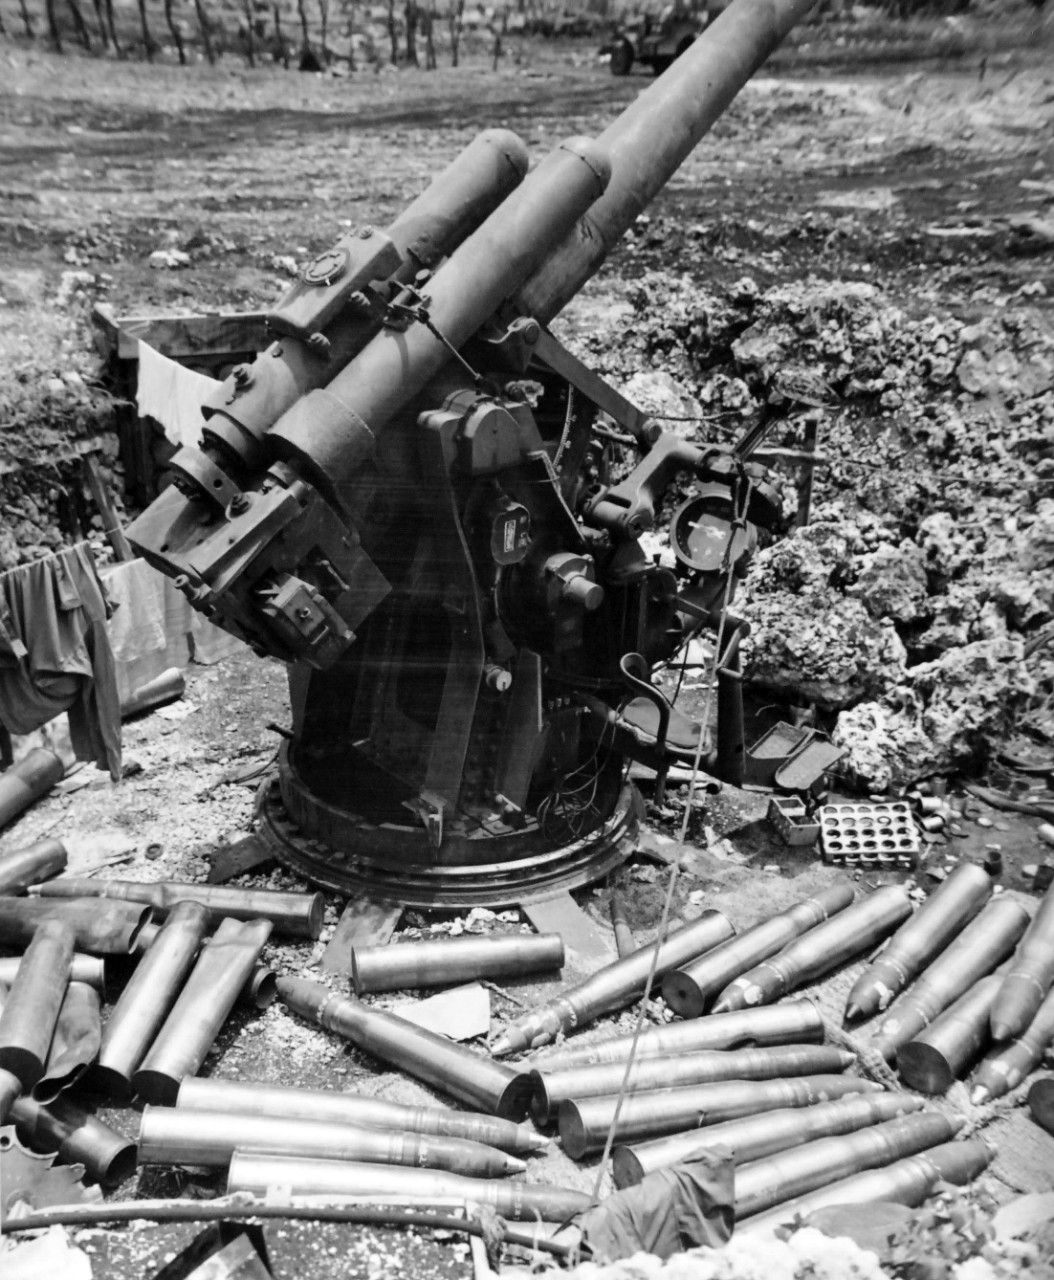 80-G-307750:  Invasion of Saipan, June-July 1944.  Japanese guns captured on Saipan after invasion.  Shown: 6” guns.  Photograph received March 20, 1945.      Official U.S. Navy Photograph, now in the collections of the U.S. Navy.  (2017/04/11).  